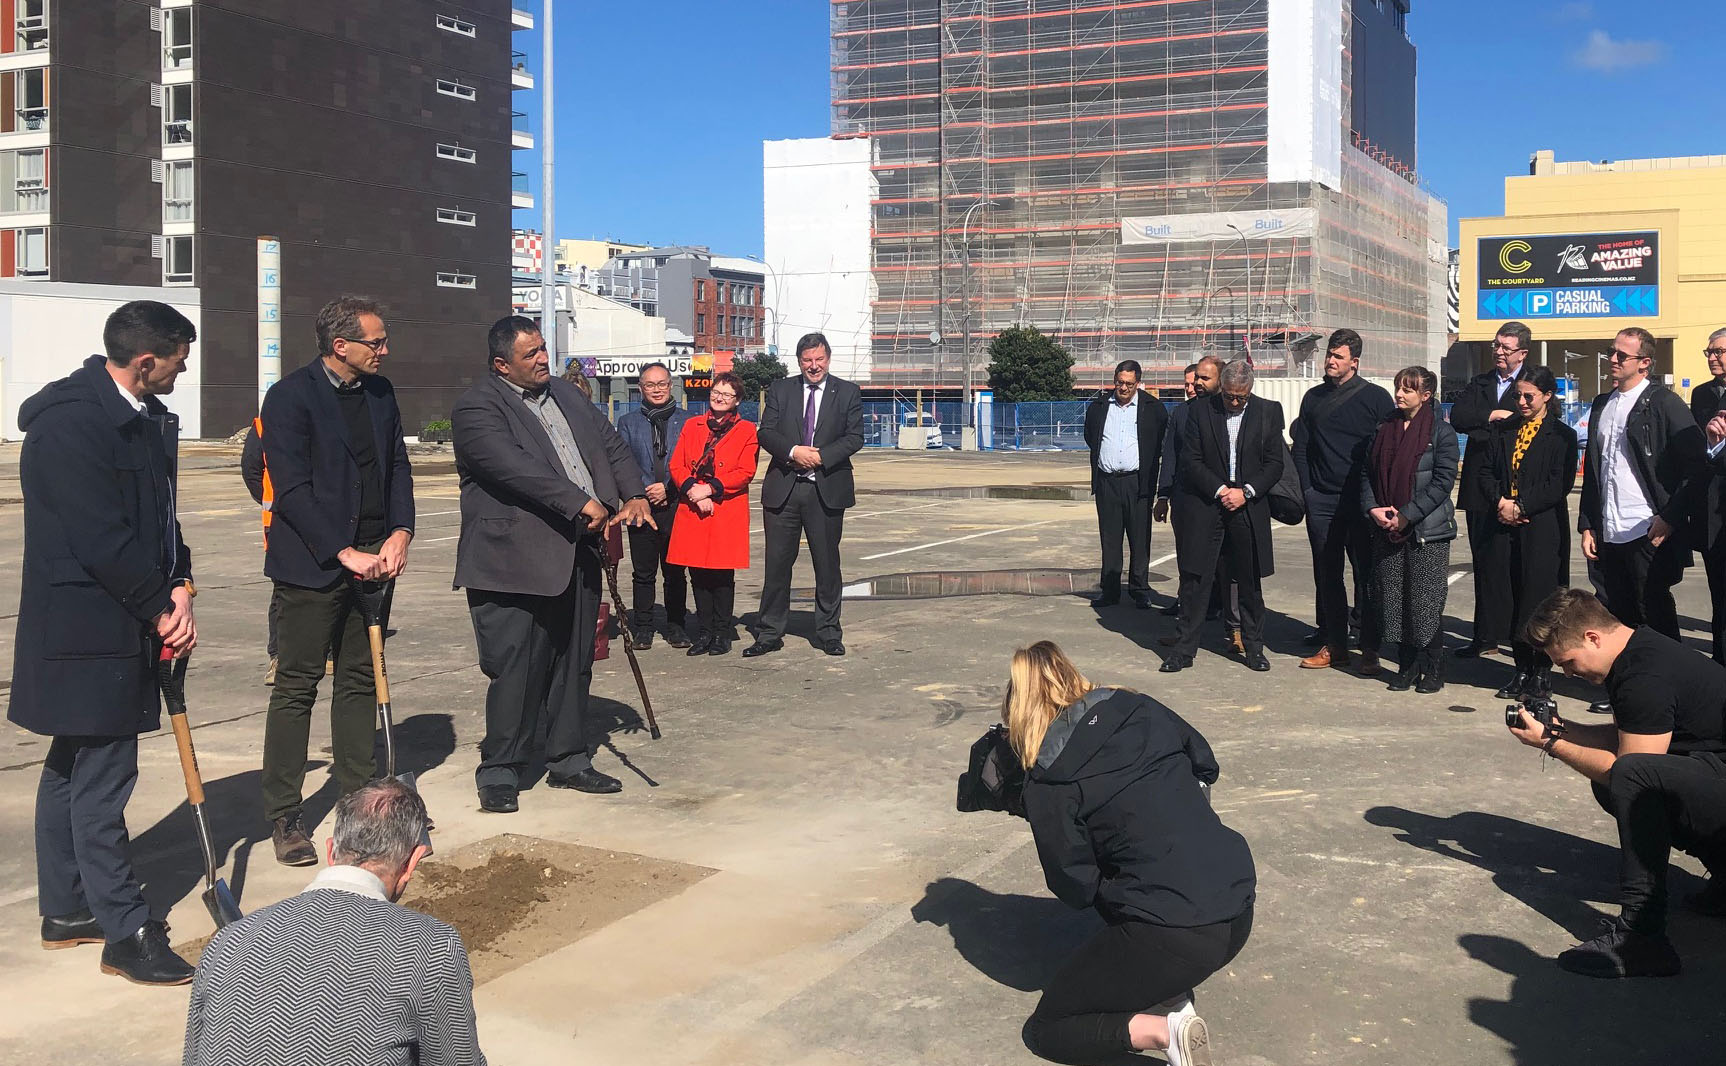 Mayor Justin Lester, David Perks (General Manager of WellingtonNZ) and Kura Moeahu of Te Āti Awa speak and break ground at the site of the new Wellington Convention and Exhibition Centre